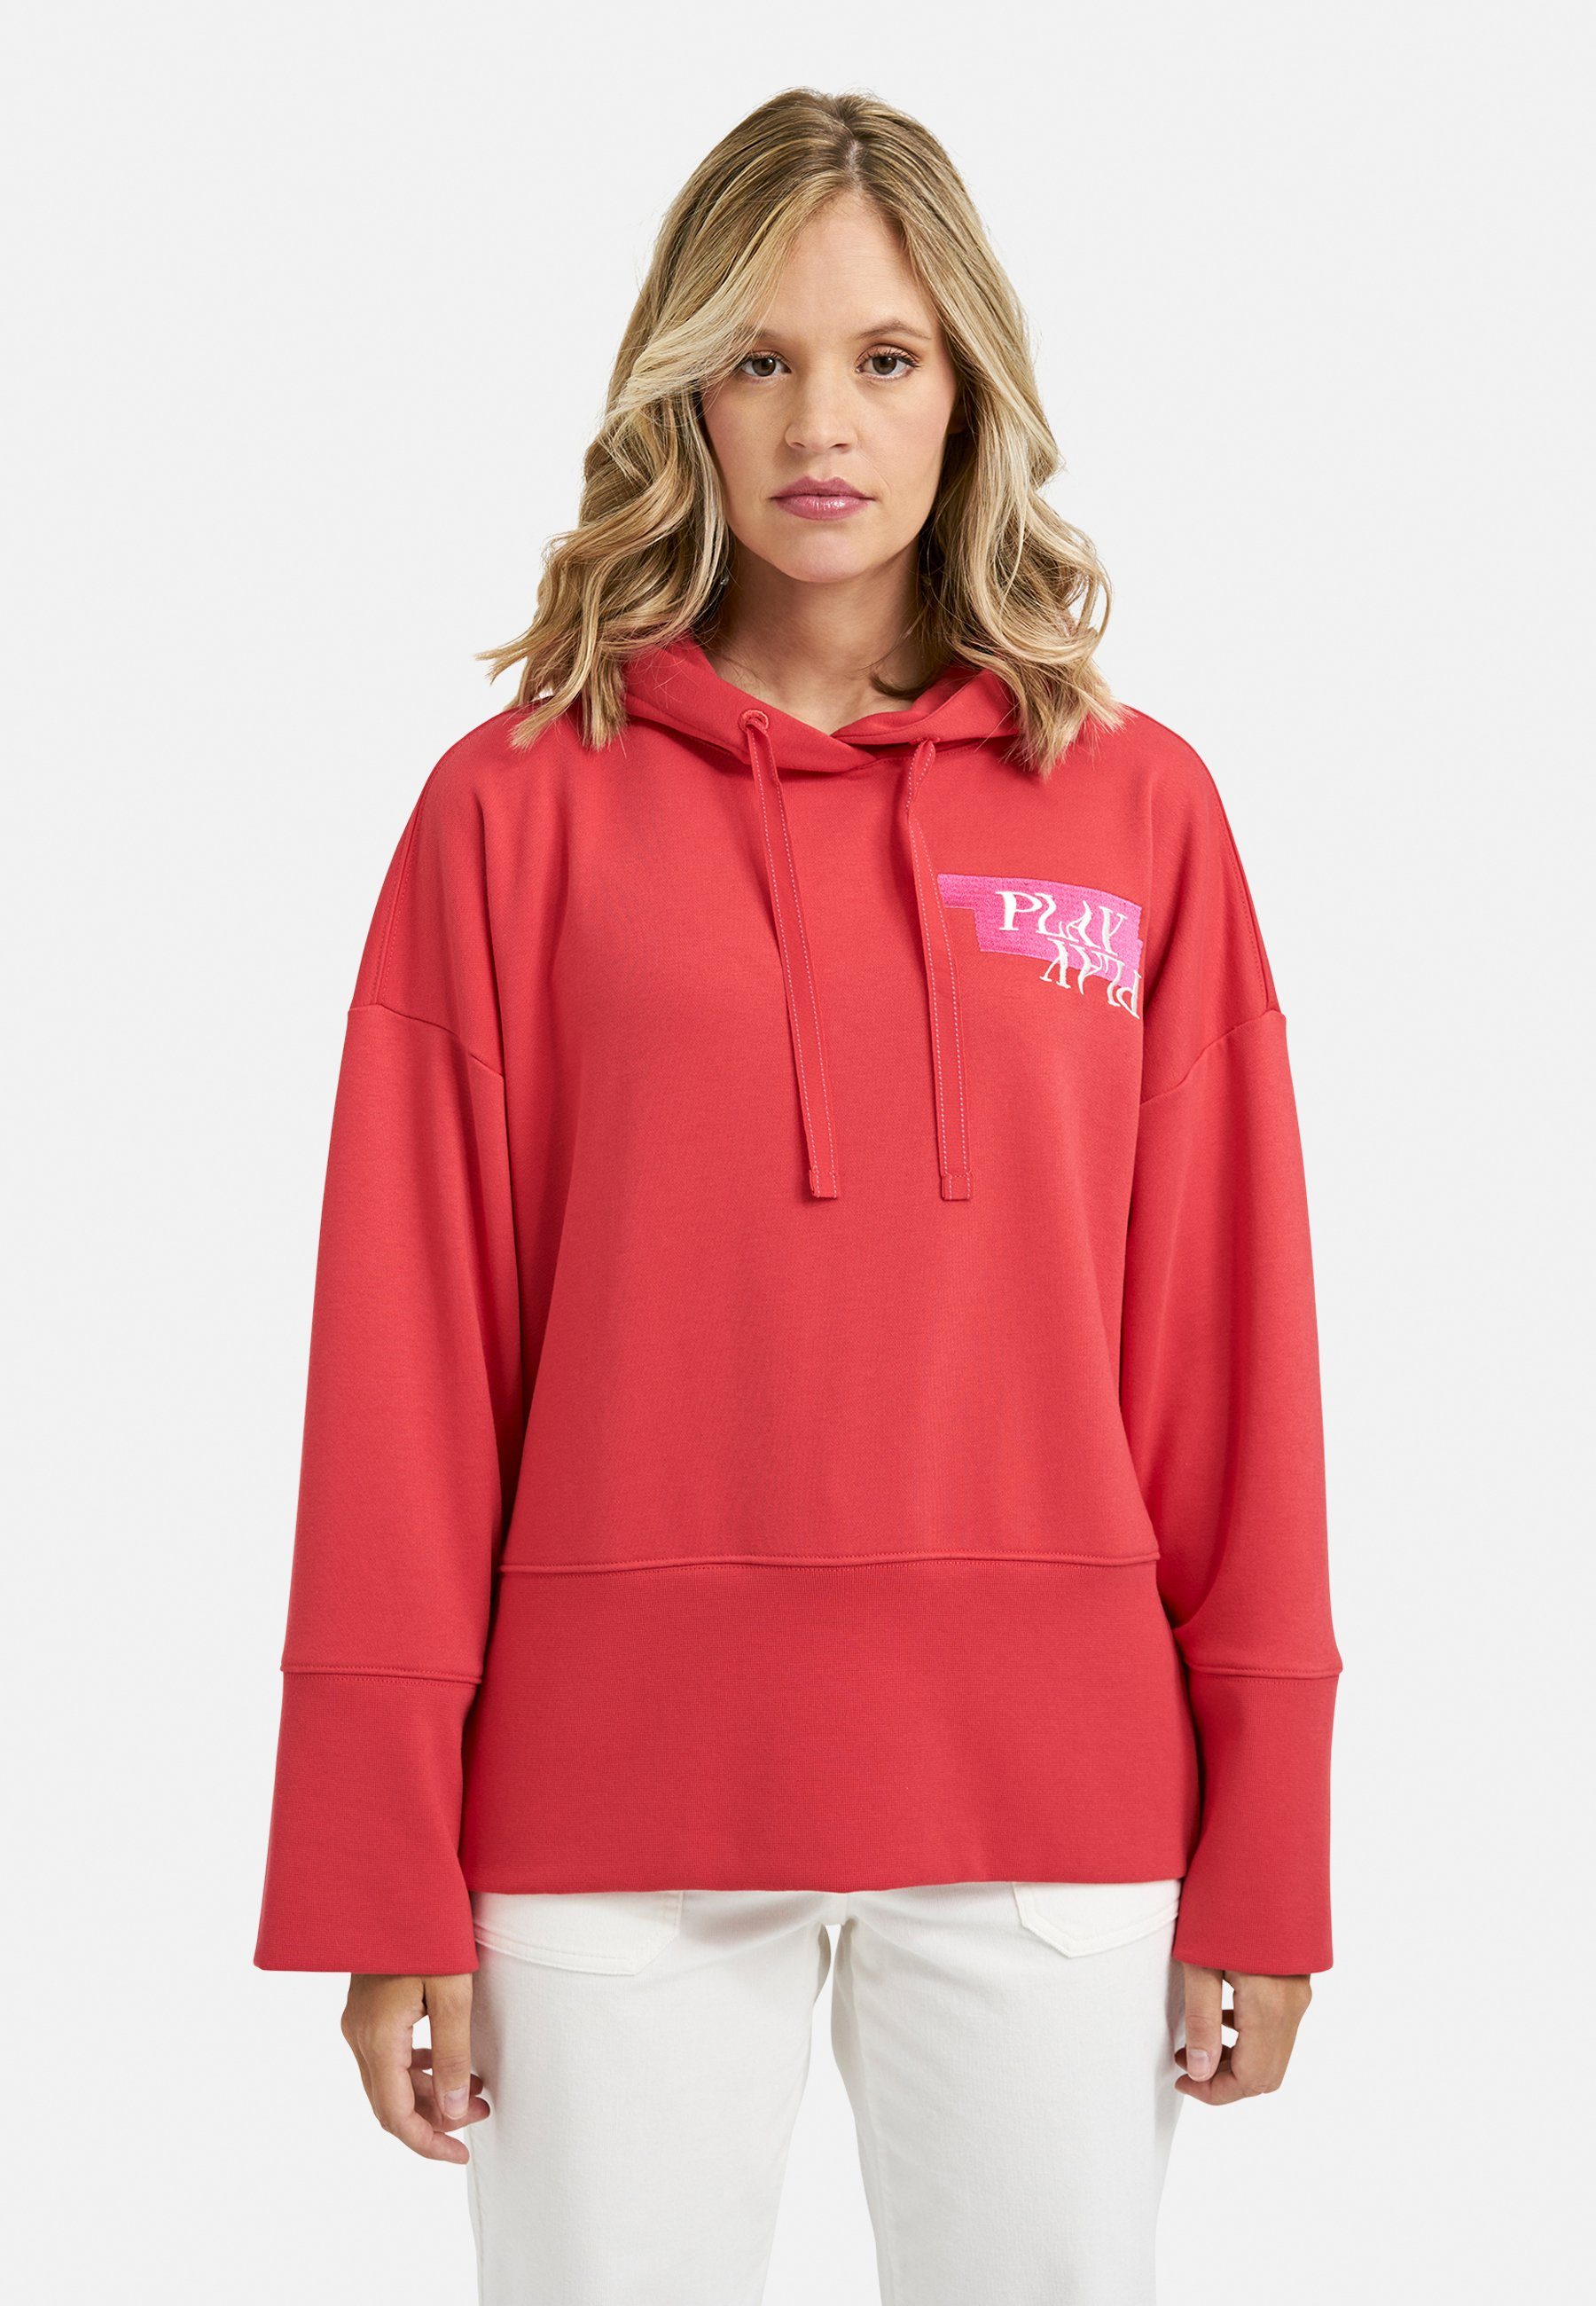 & Soul Play Smith cherry Hoodie